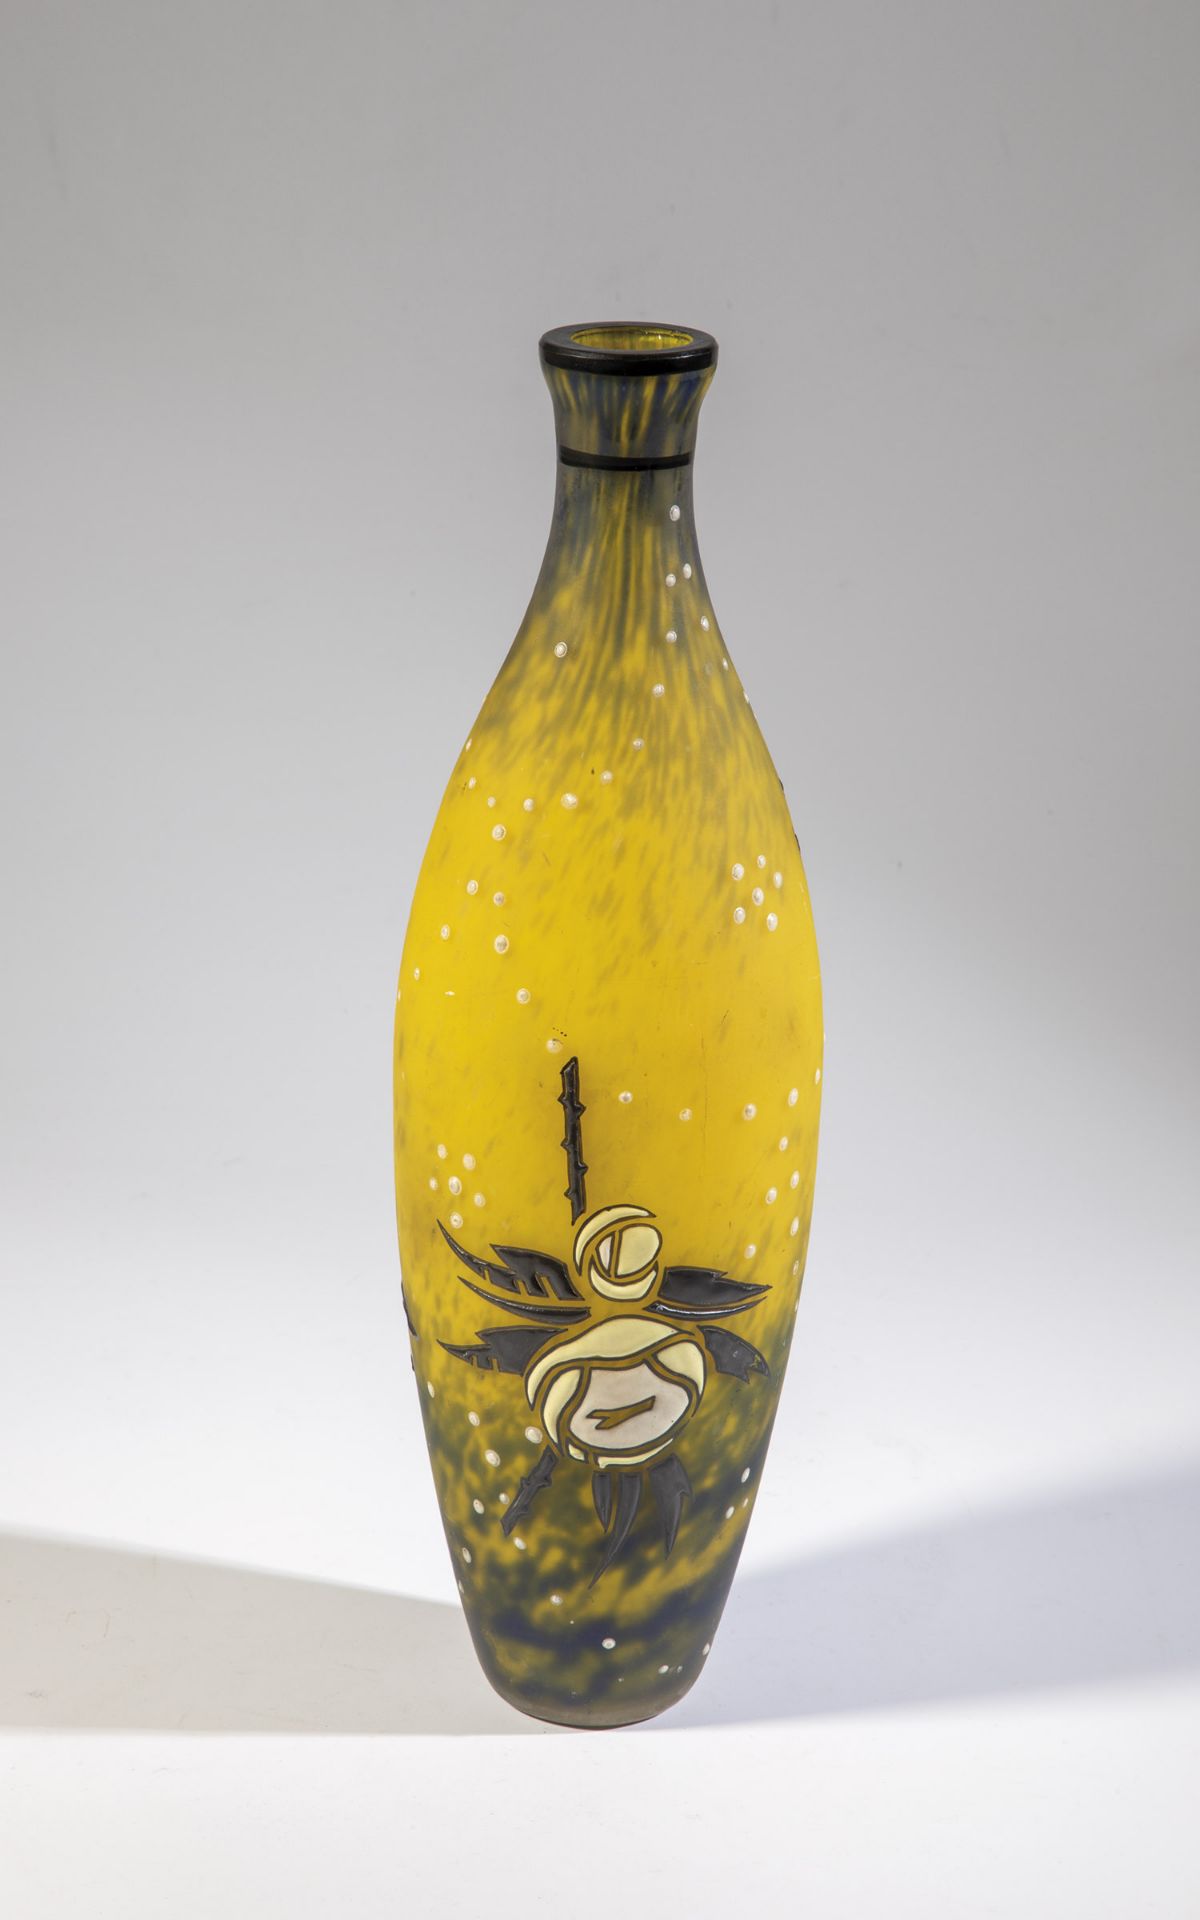 Vase Andre Delatte, Nancy, ca. 1925 Colorless glass with flaky powder melting in yellow and blue.